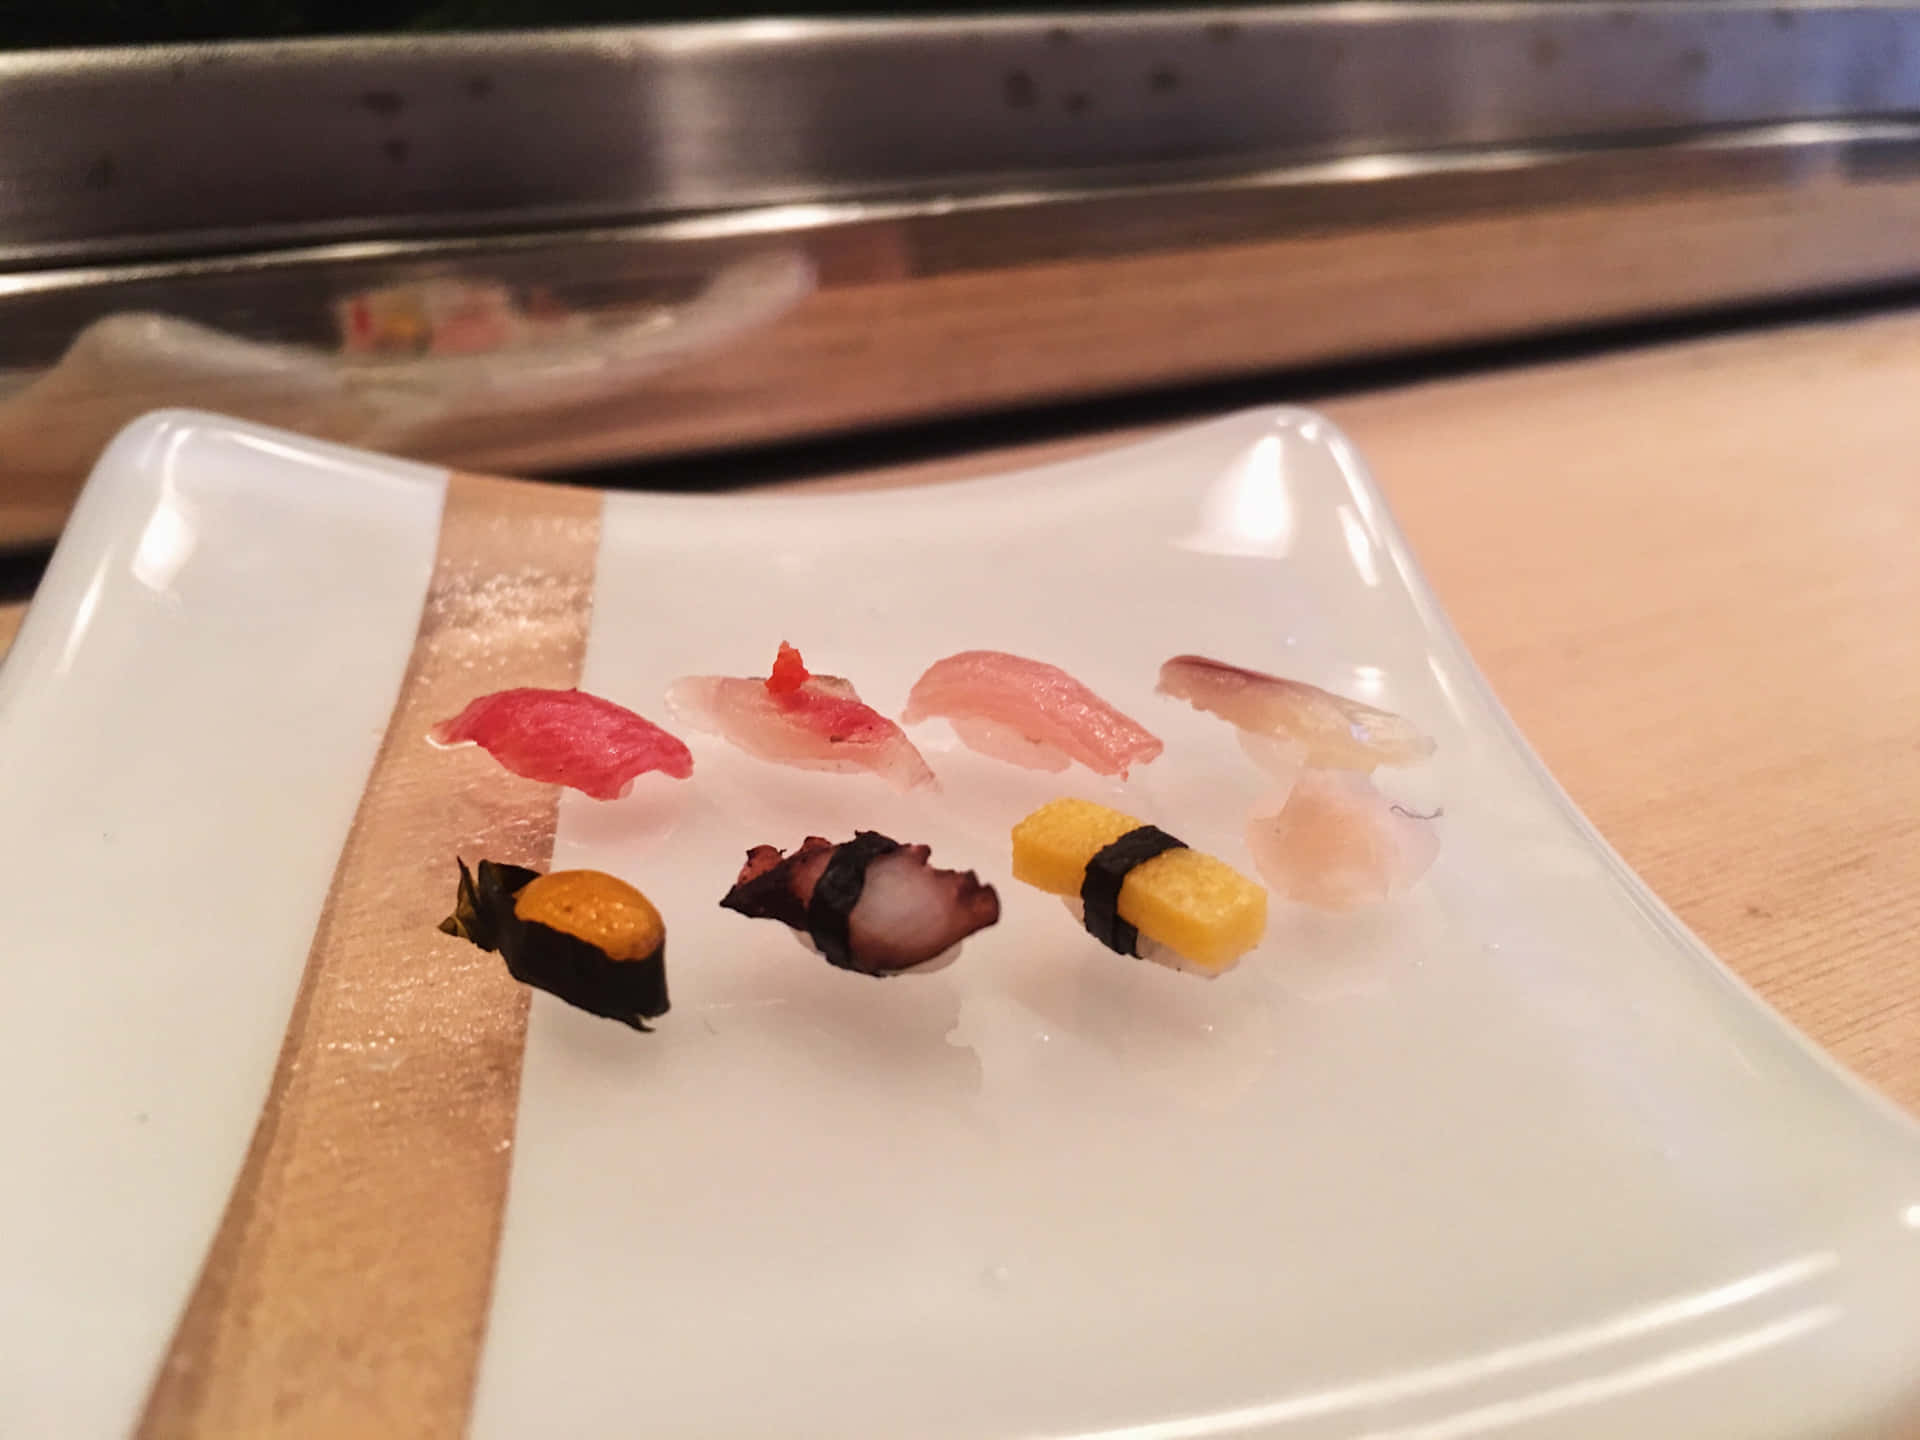 A feast of assorted sushi rolls on a wooden table